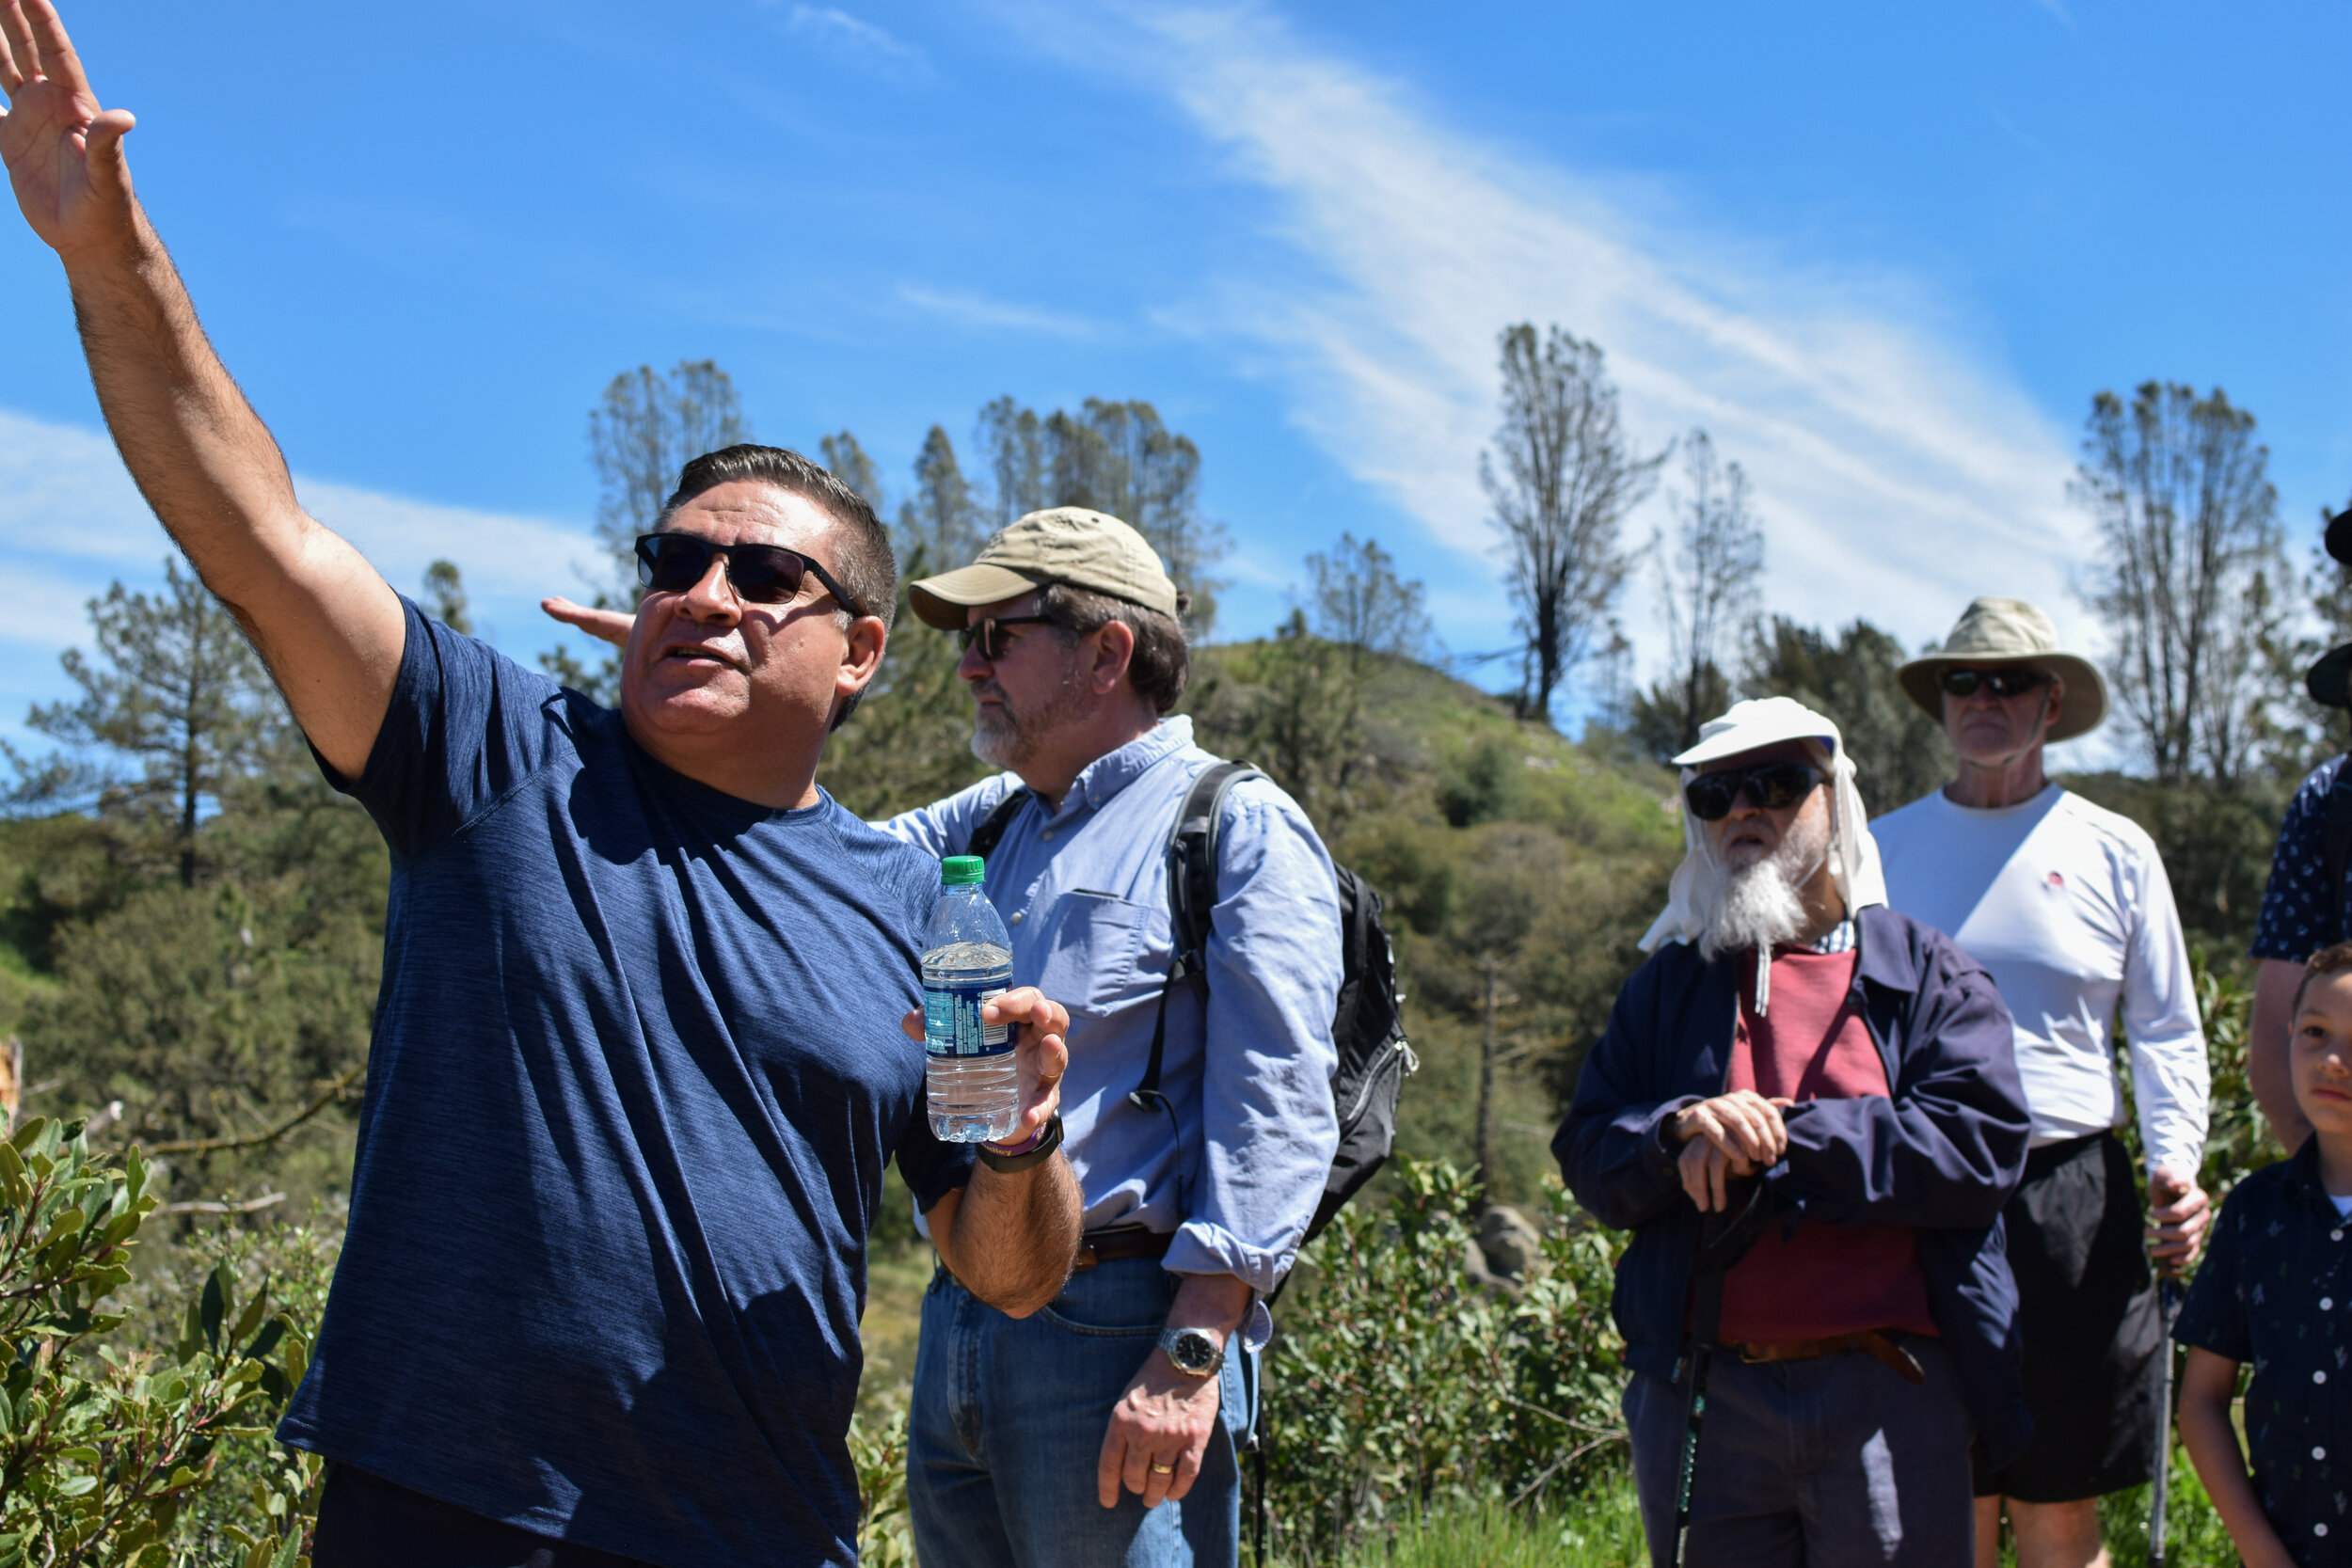  Representative Salud Carbajal admires the surrounding environment at the Los Padres National Forest on a hike with constituents.  